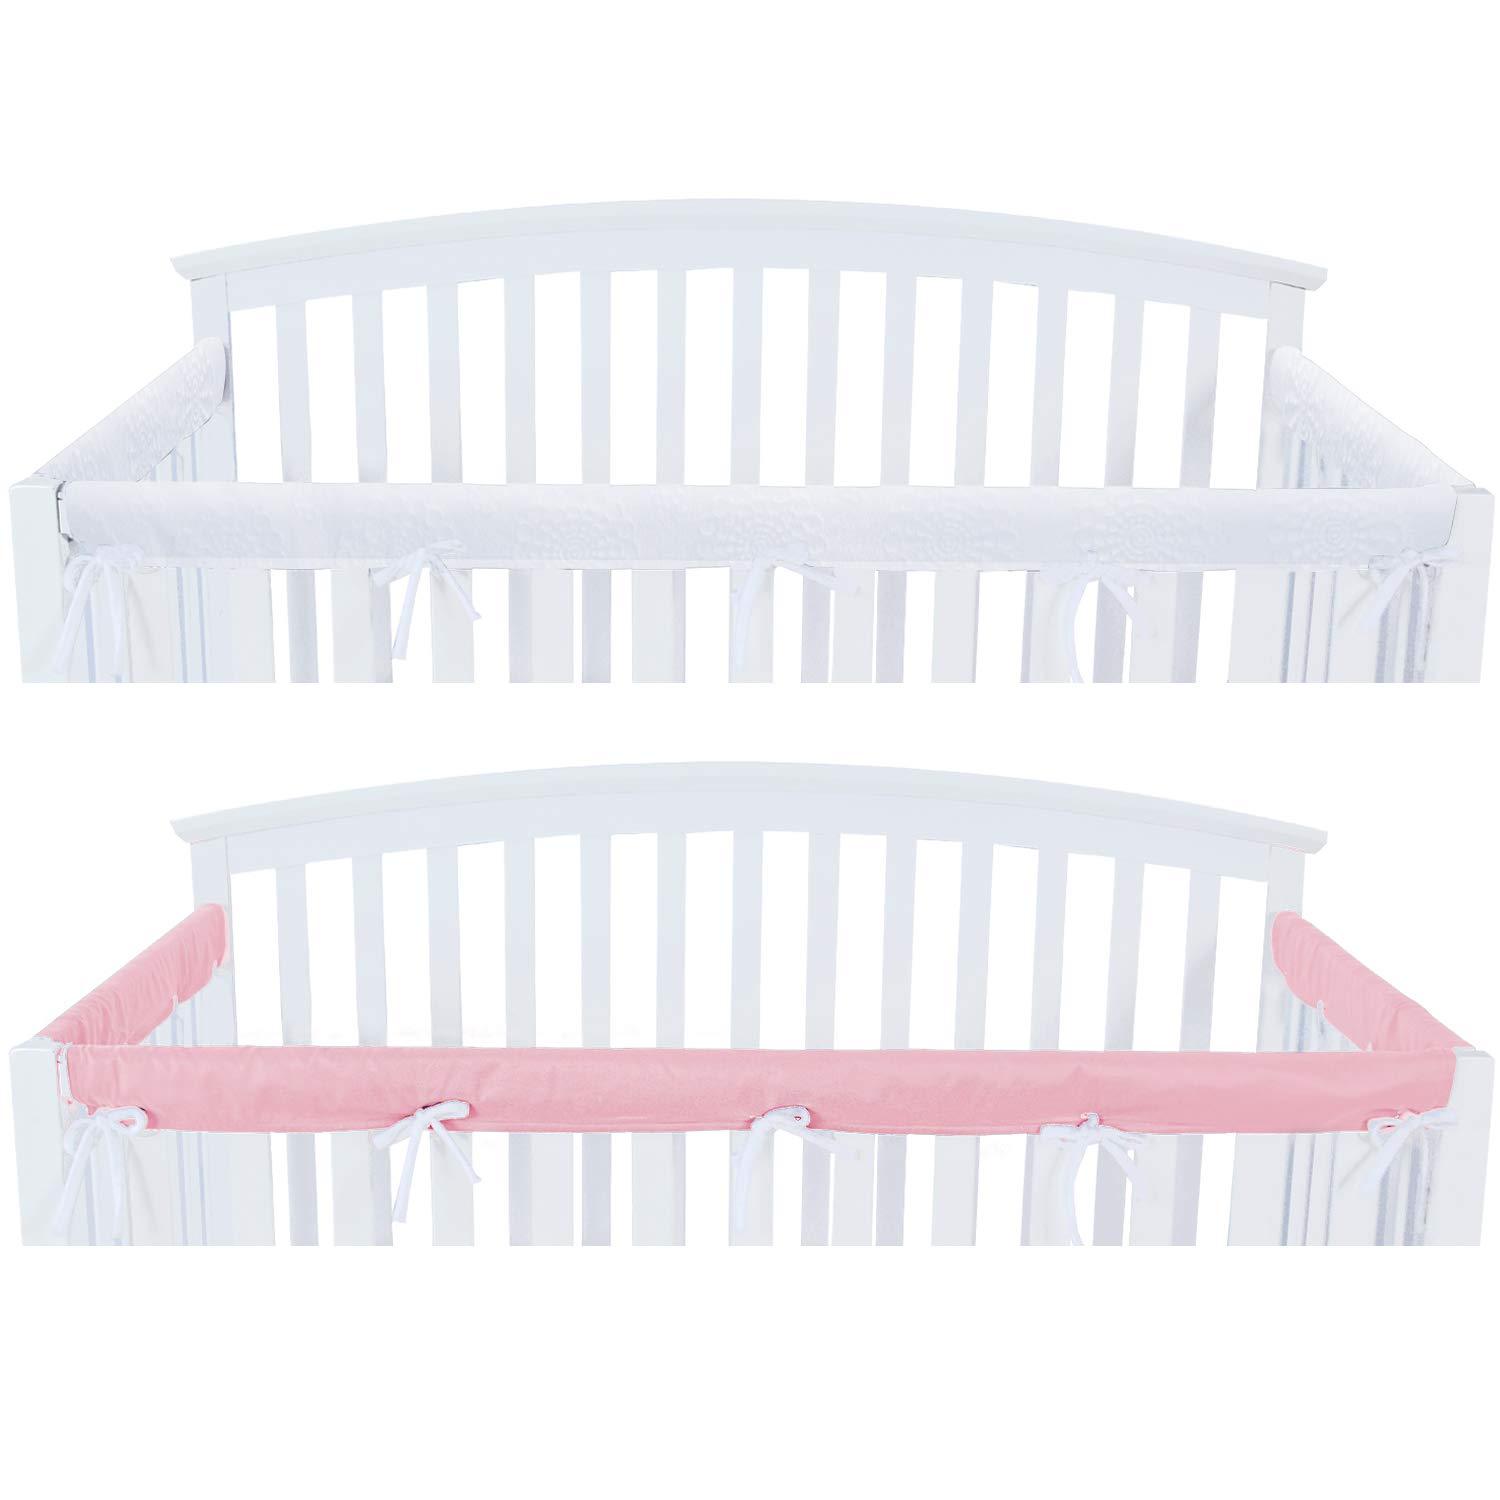 3 Pieces Crib Rail Cover - Protector Safe Teething Guard Wrap, Reversible, Fit Side and Front Rails, Pink & White - Biloban Online Store